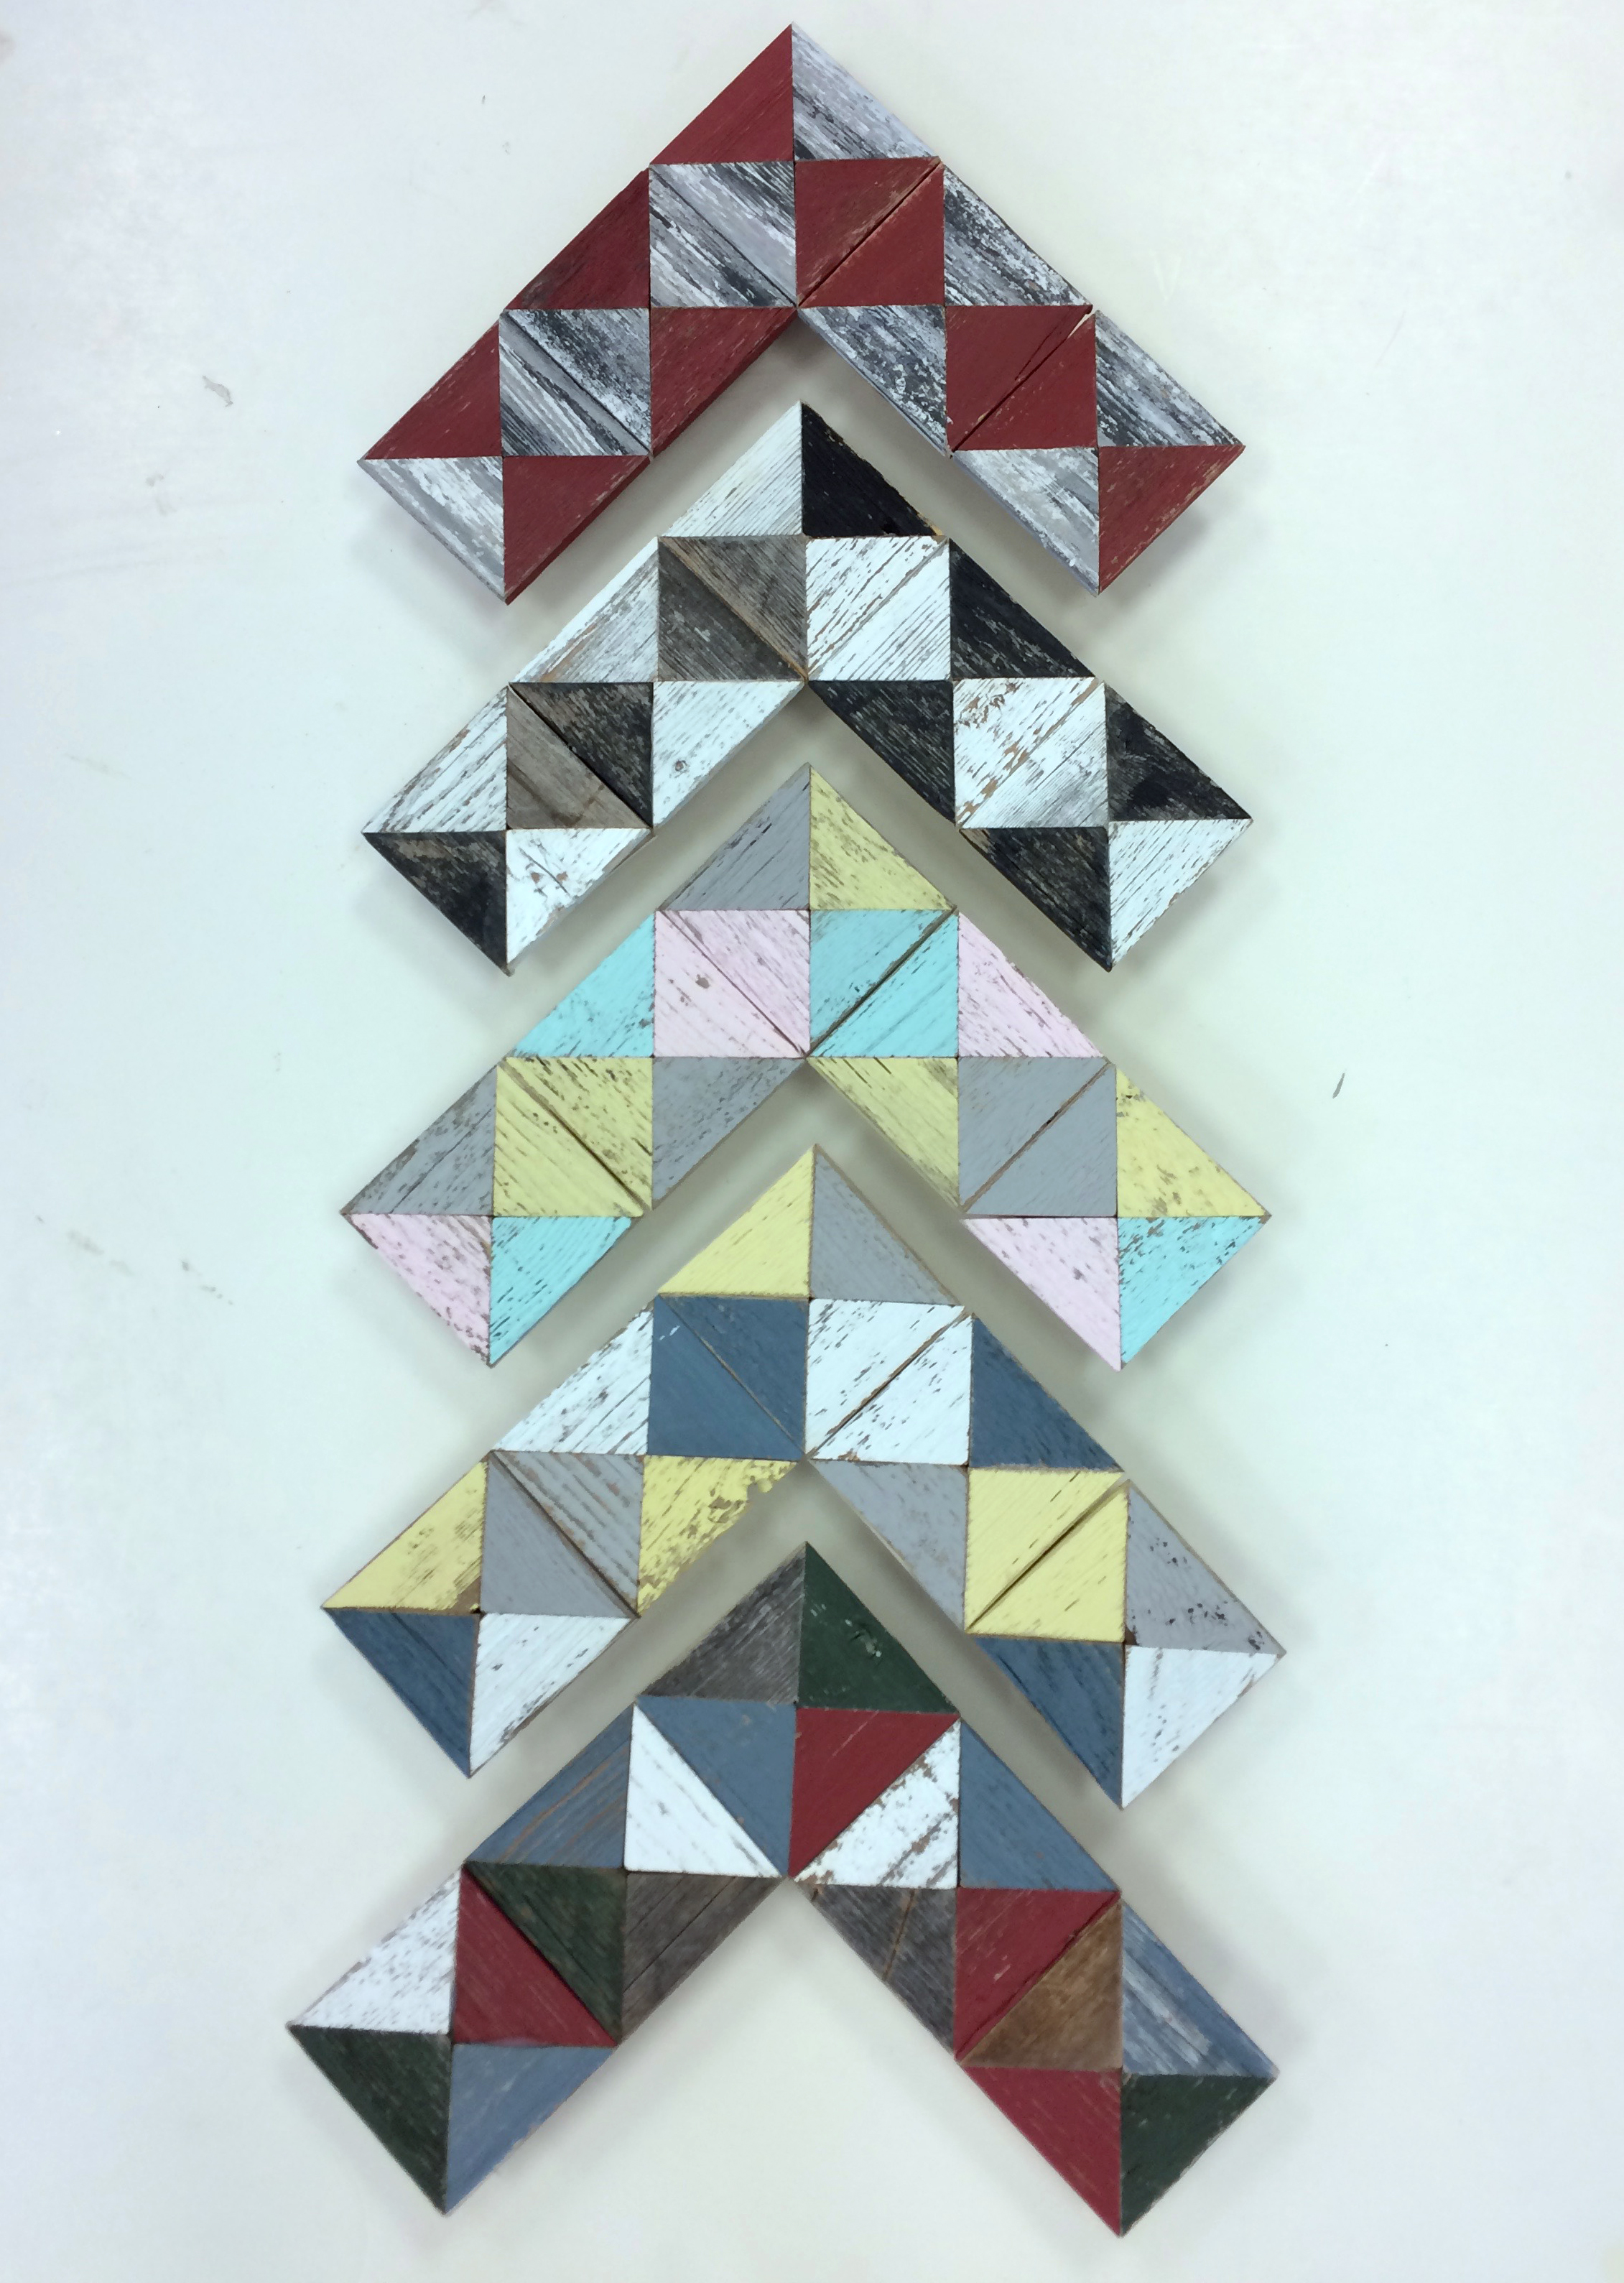 Barnwood triangle cut-outs pieced together to form a variety of beautiful patterns